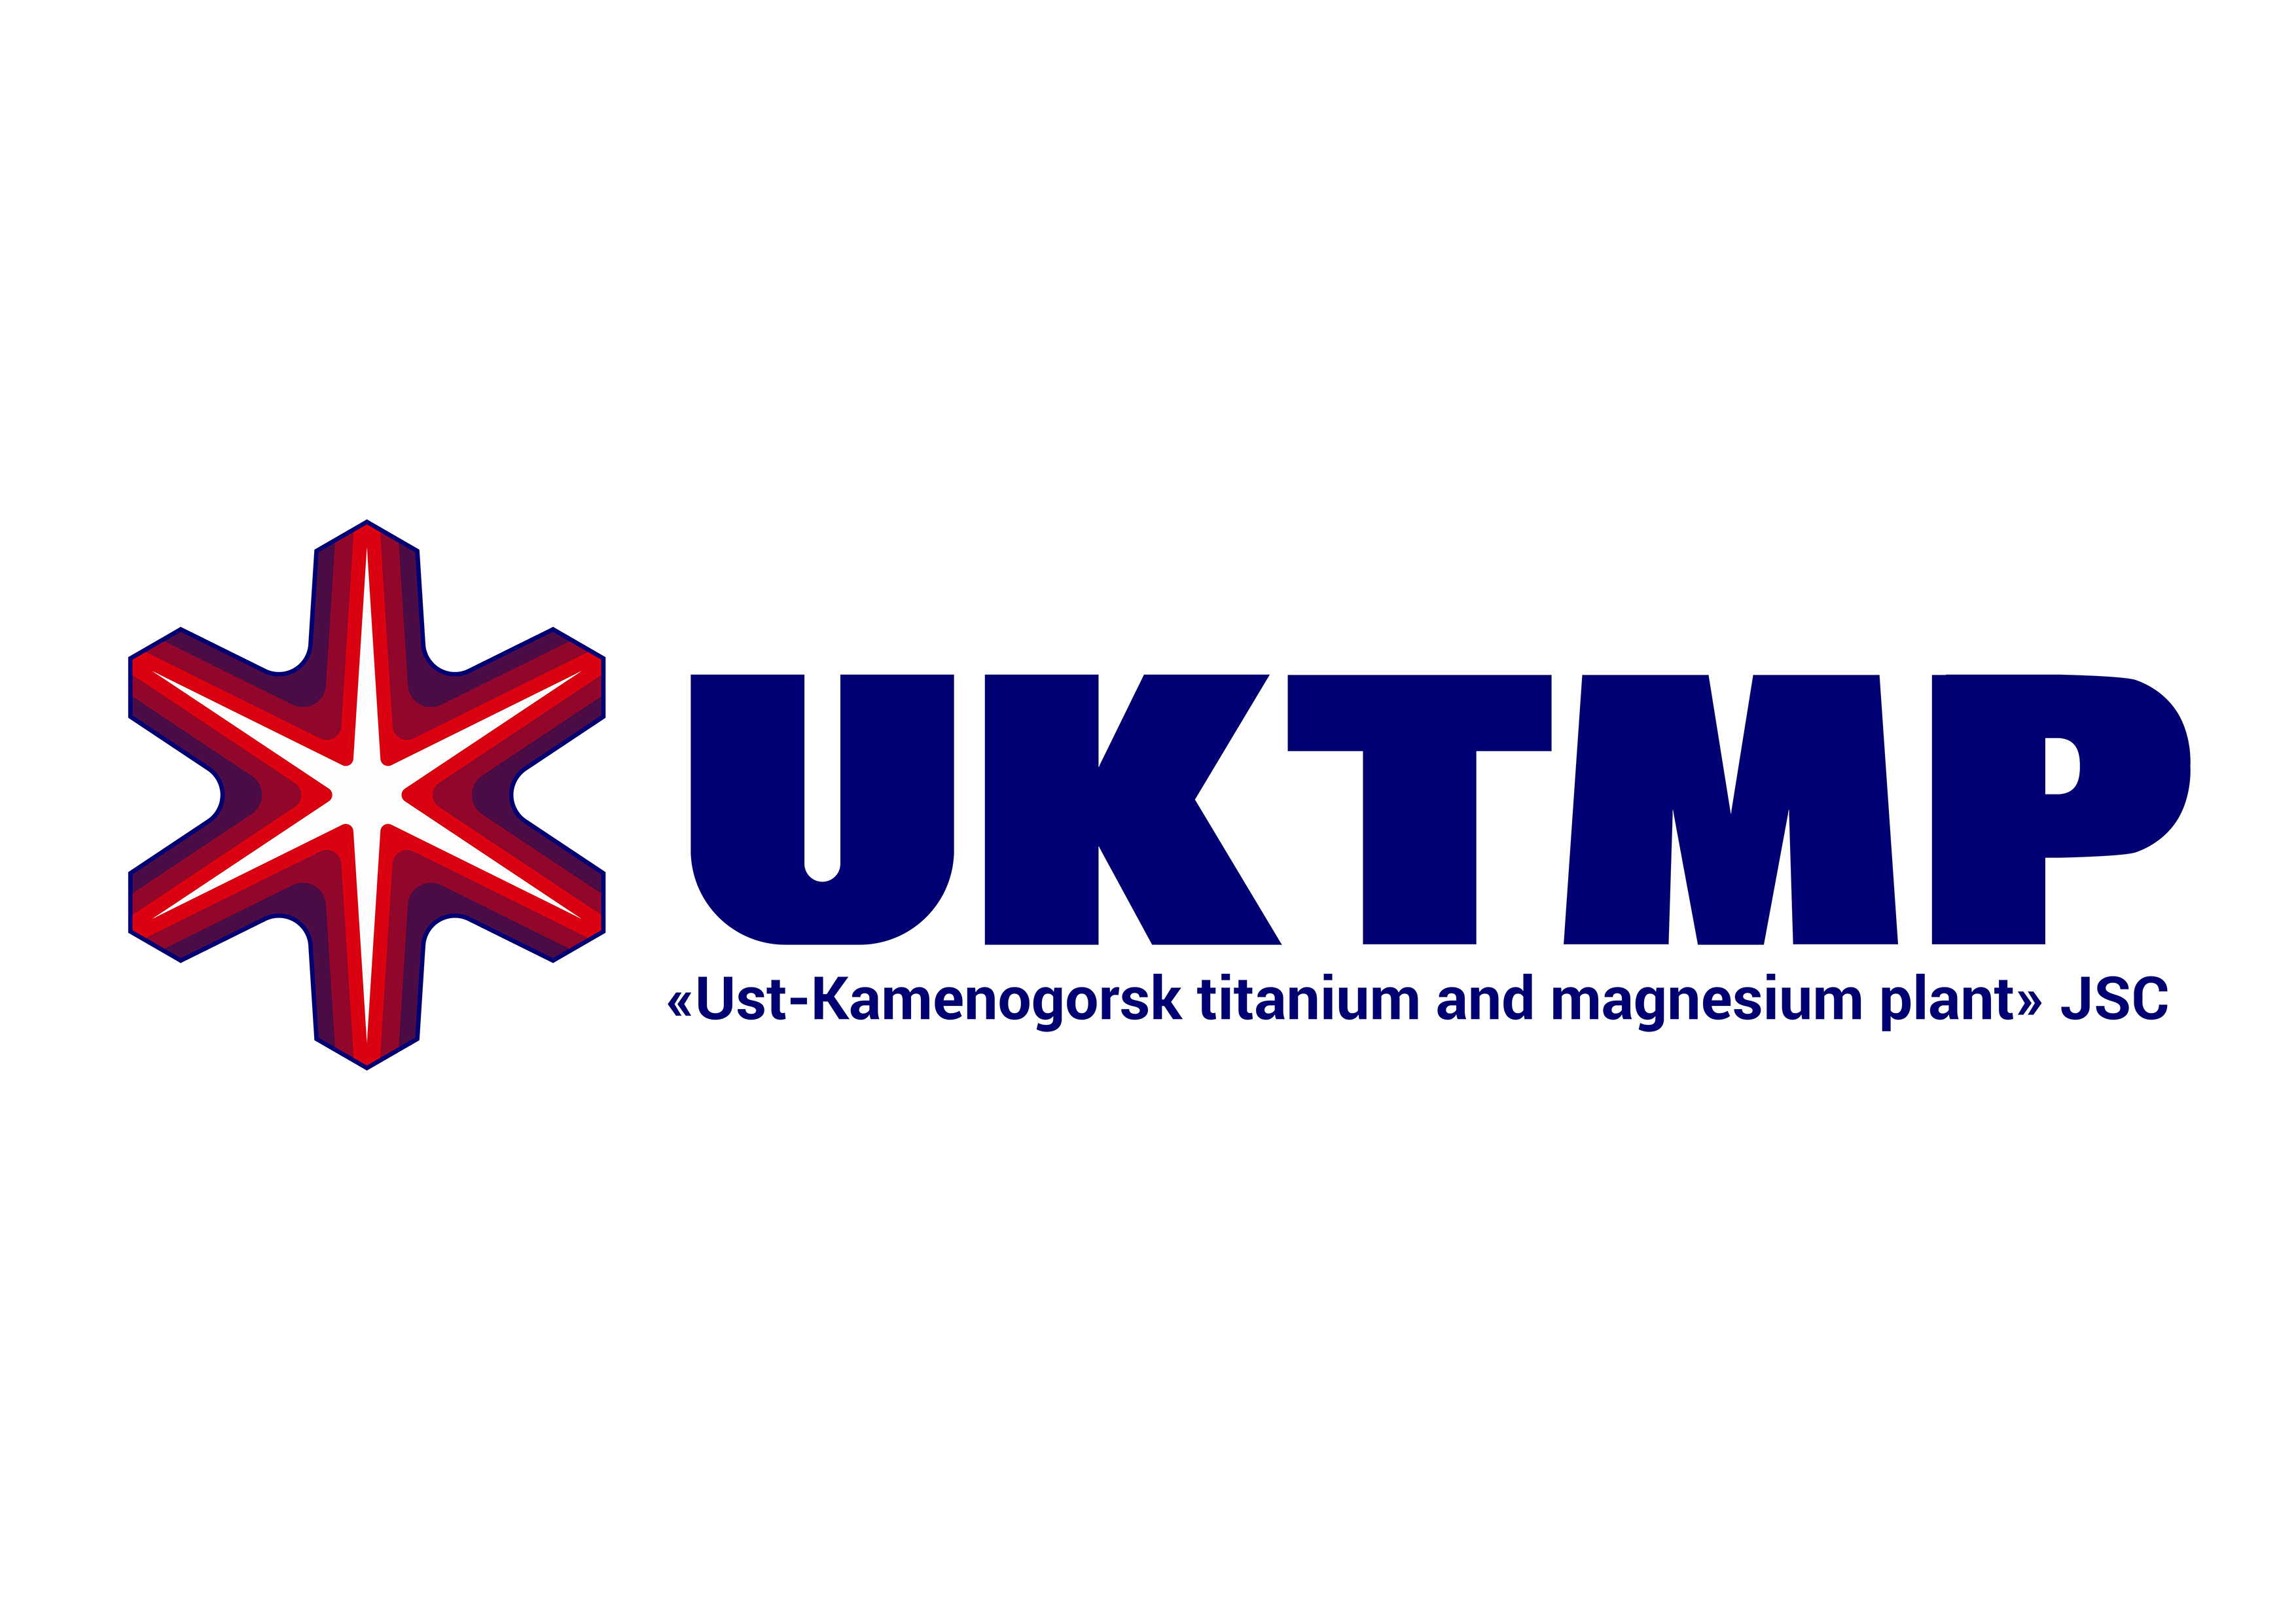 Notification about holding Extraordinary General Meeting of shareholders of Ust-Kamenogorsk Titanium and Magnesium Plant JSC